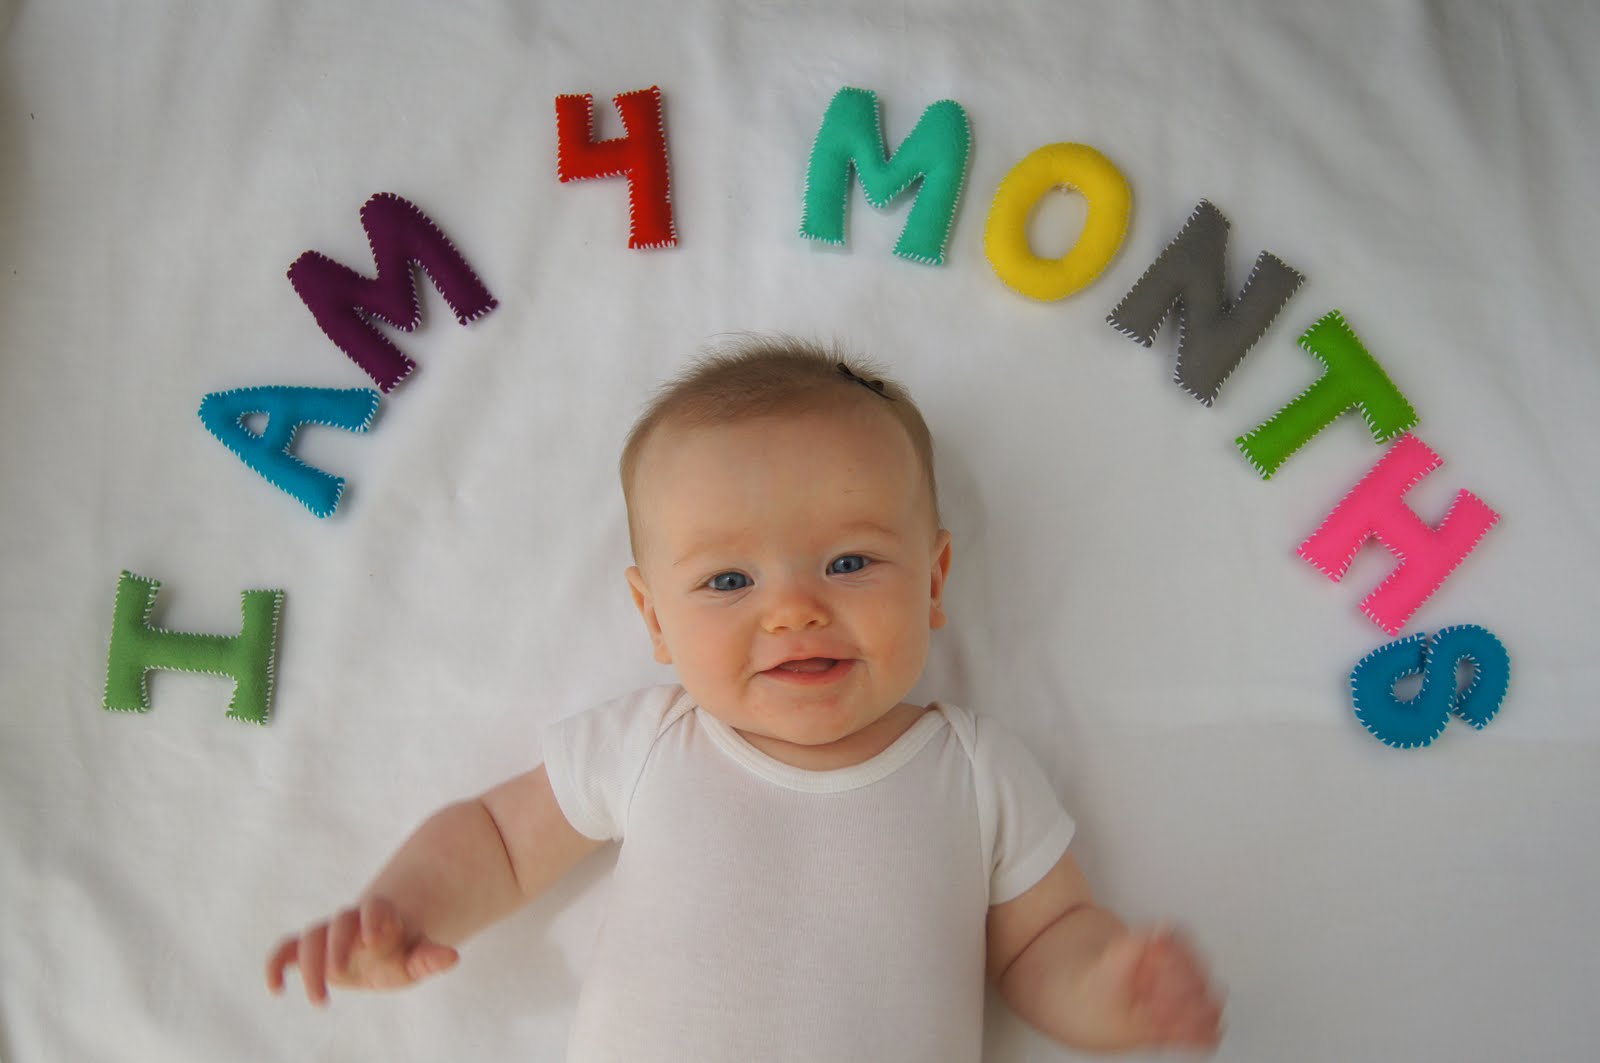 7 months ago. 4 Months. Happy 10 months old картинки. 29 Month old.